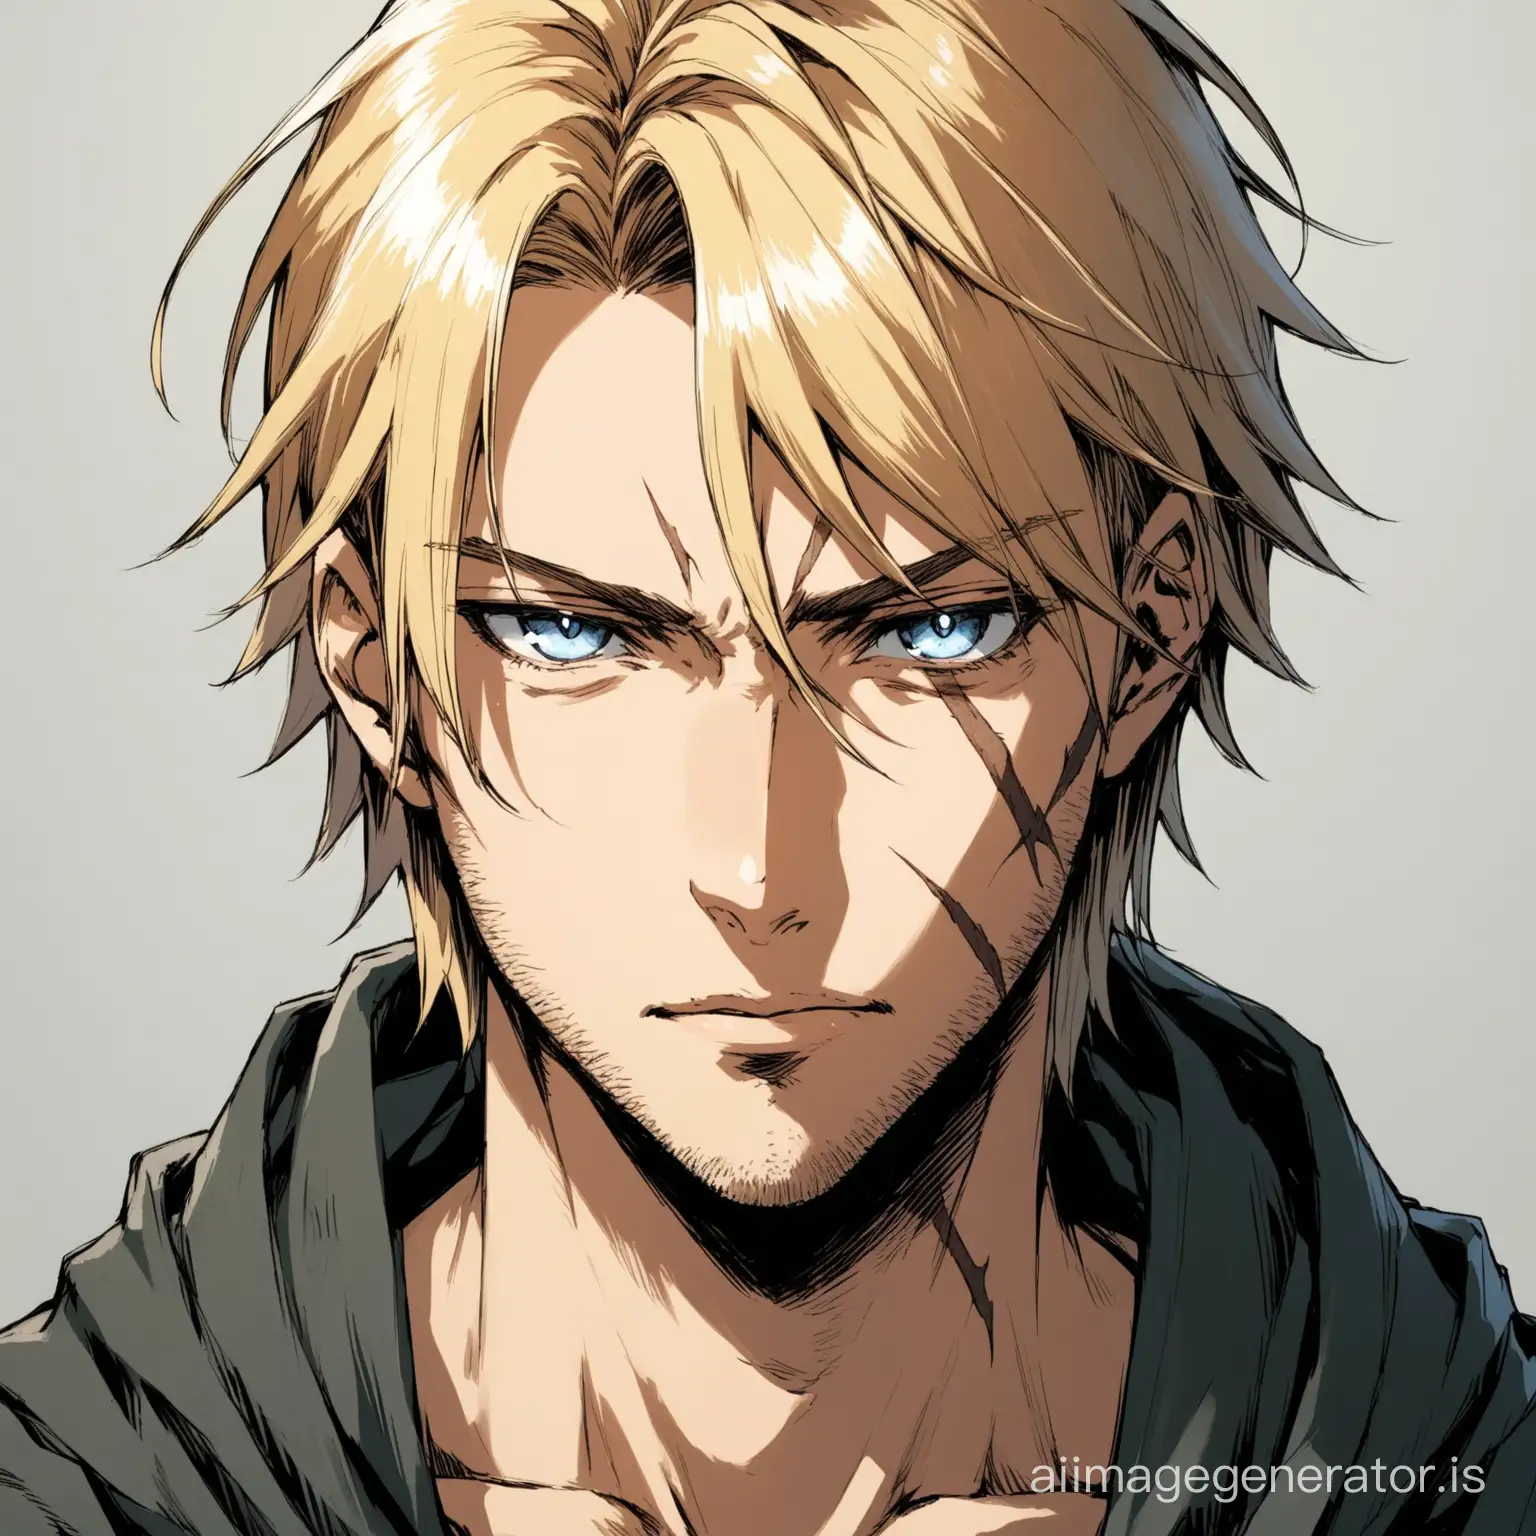 Anime-Russian-Man-with-Distinctive-Features